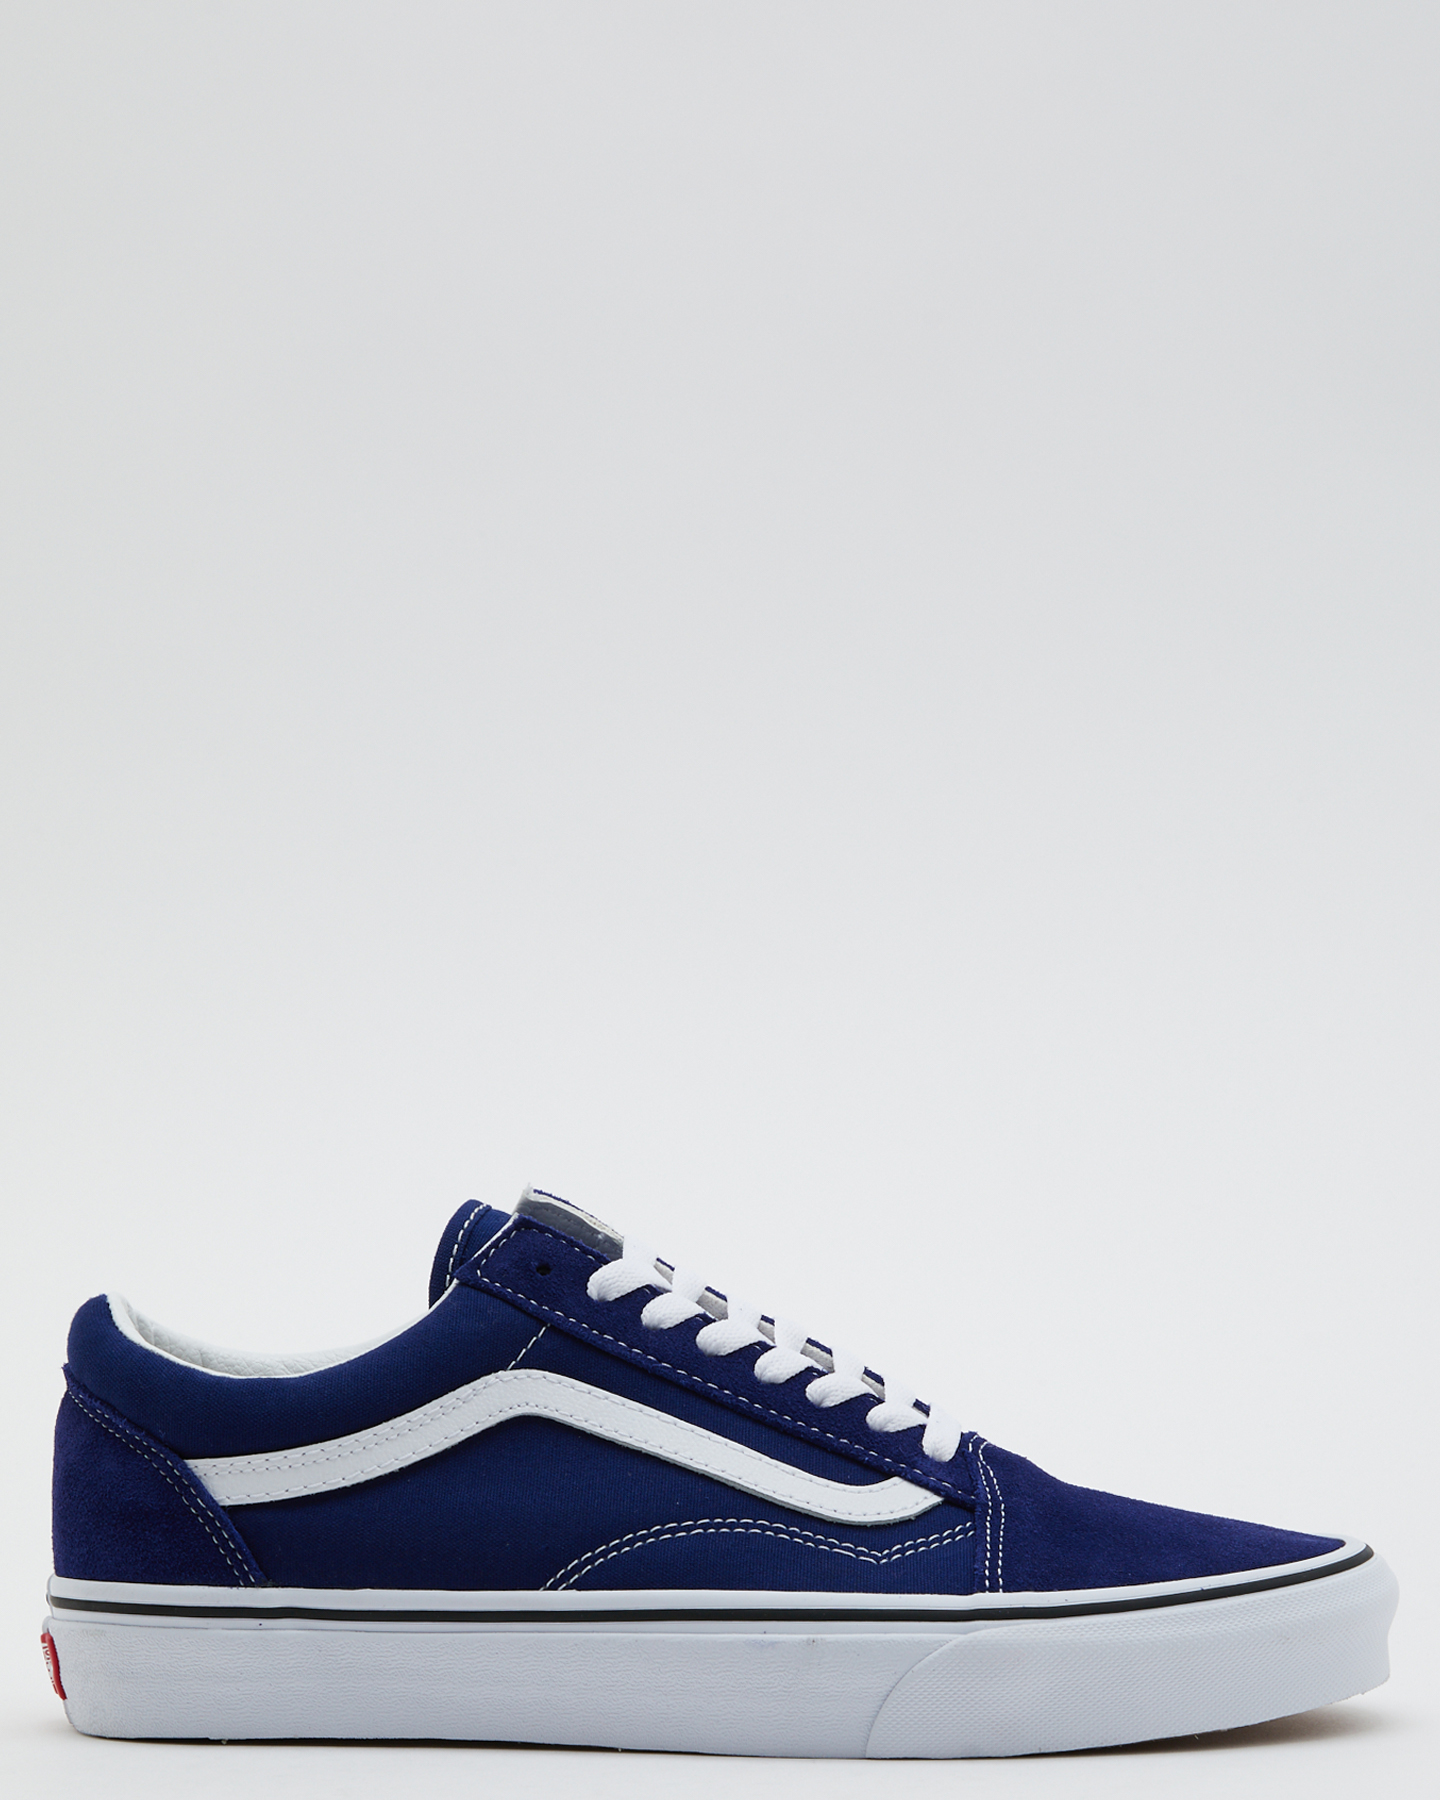 Vans Old Skool Color Theory Beacon Blue - Beacon Blue | SurfStitch